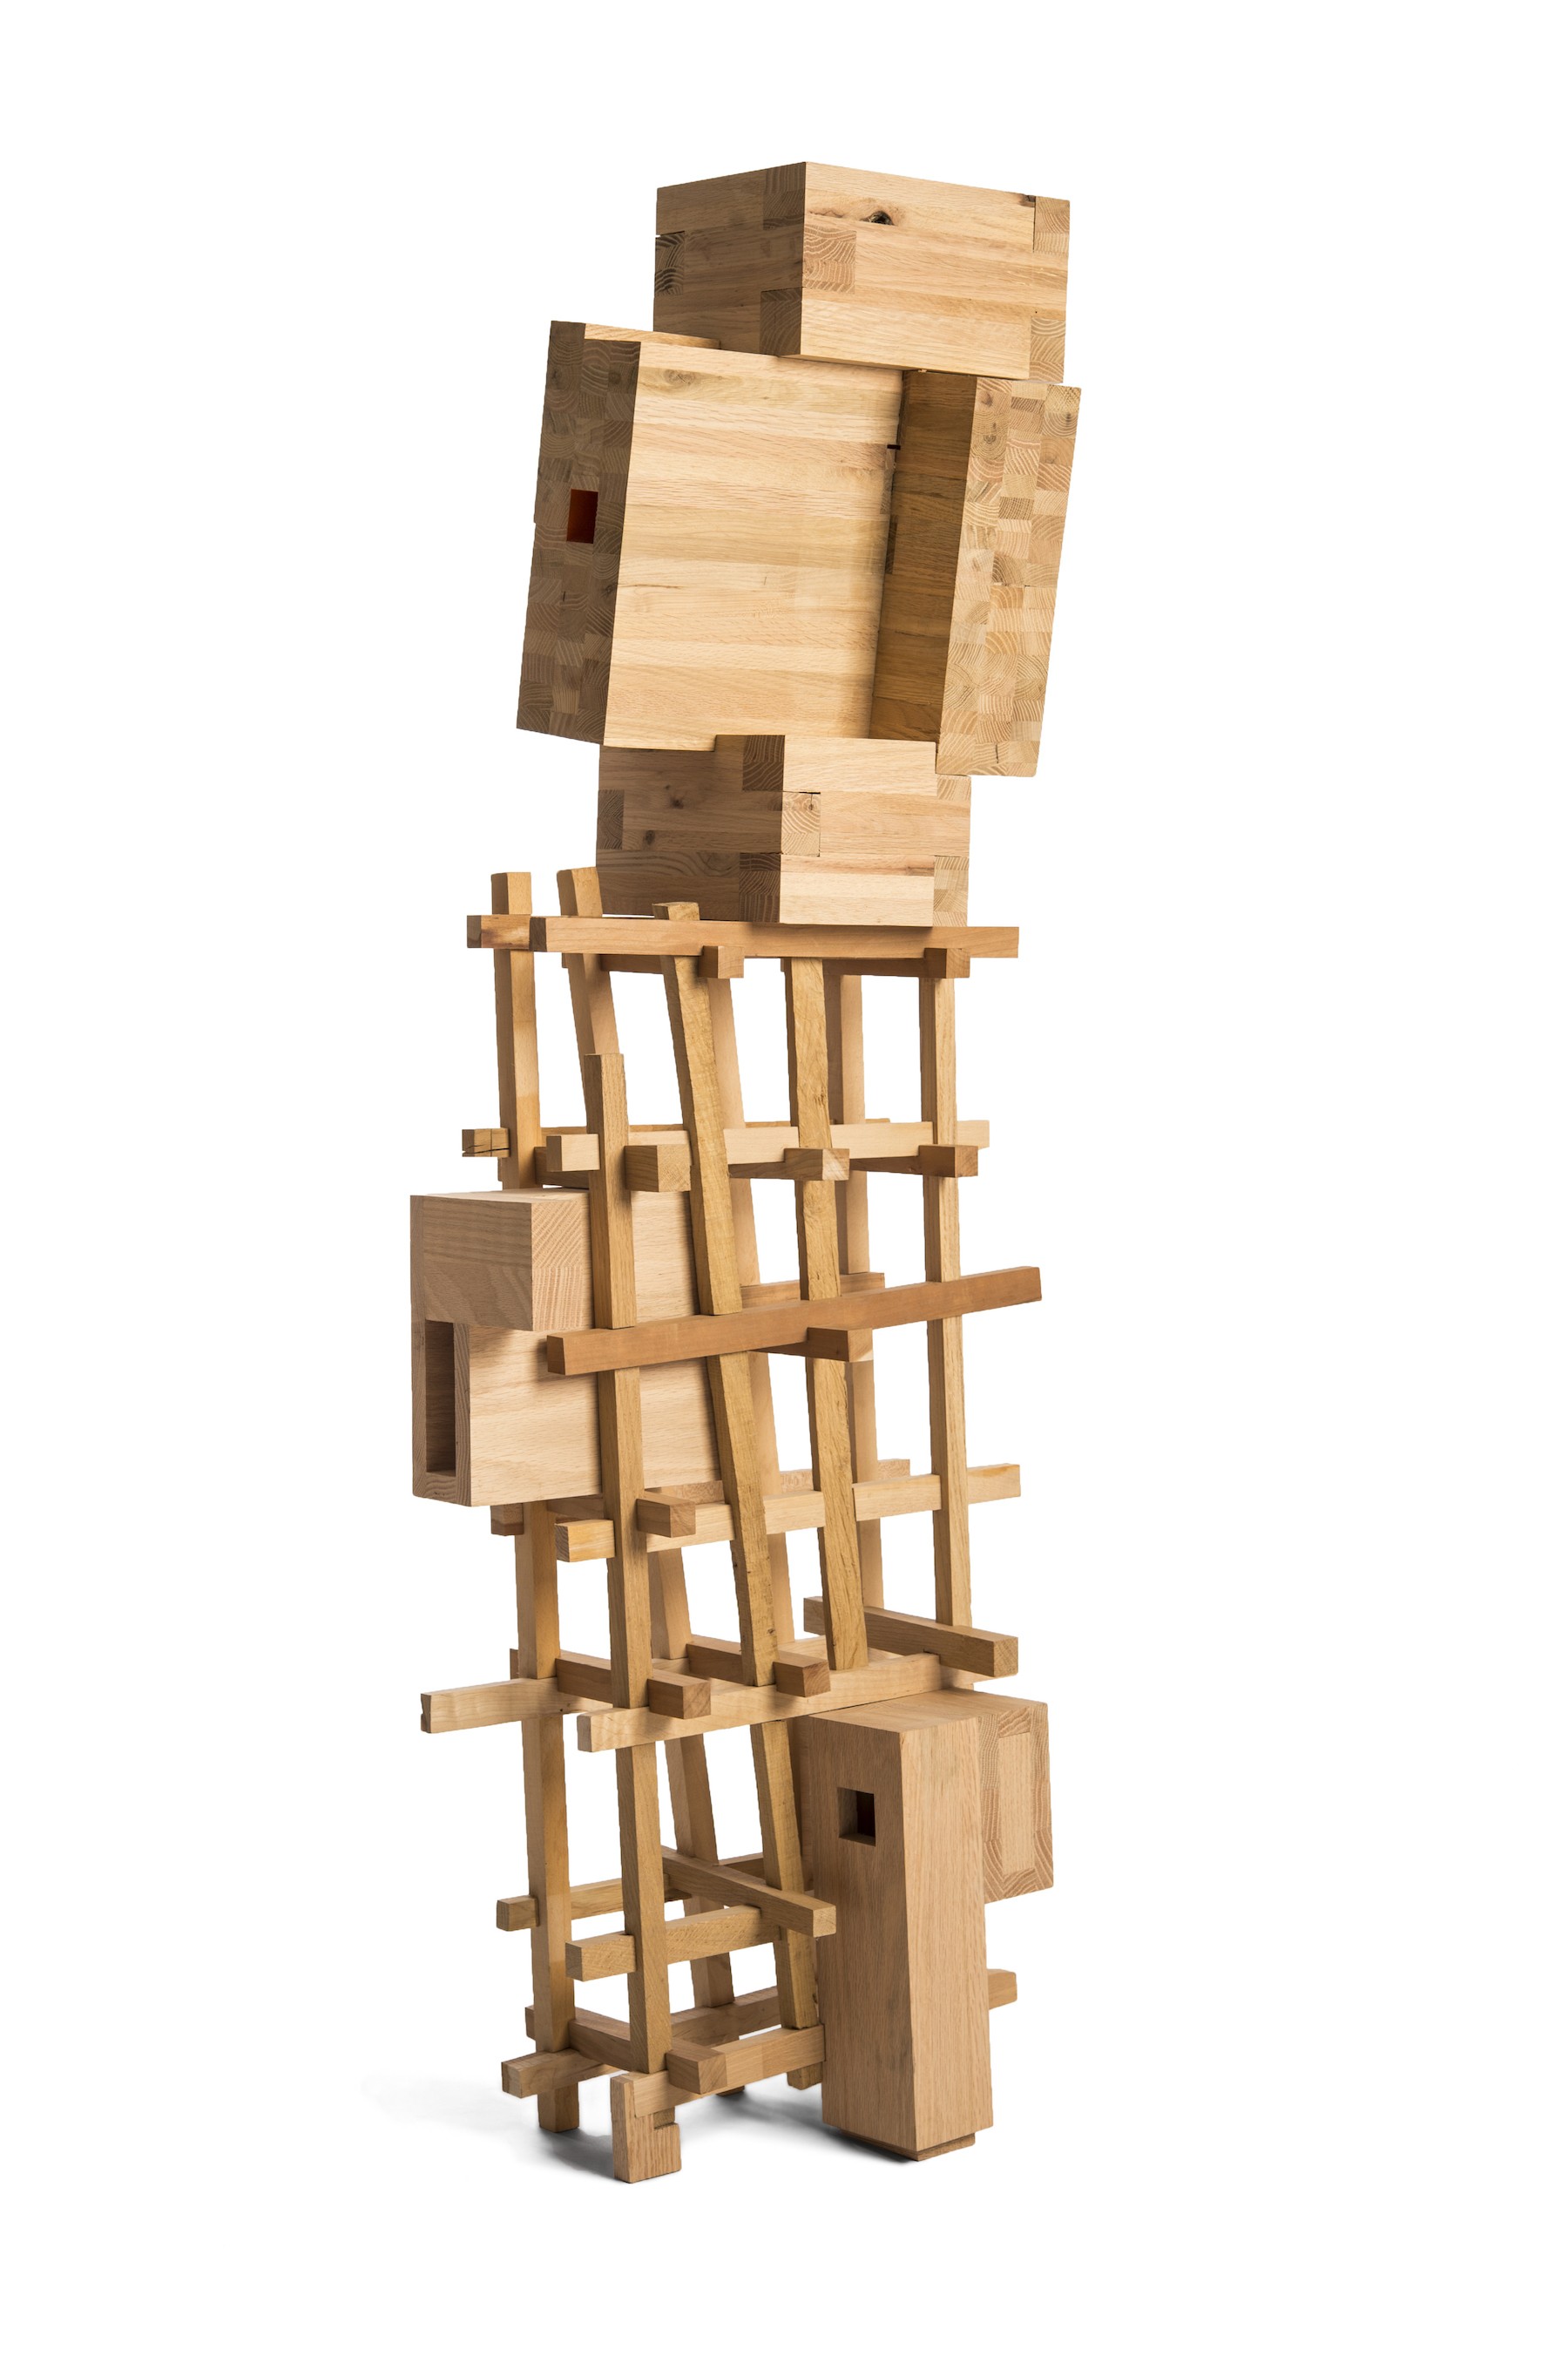 Tall and narrow sculptural form made of pieces of wood stock stacked in a ladder shape with four box forms at the top.